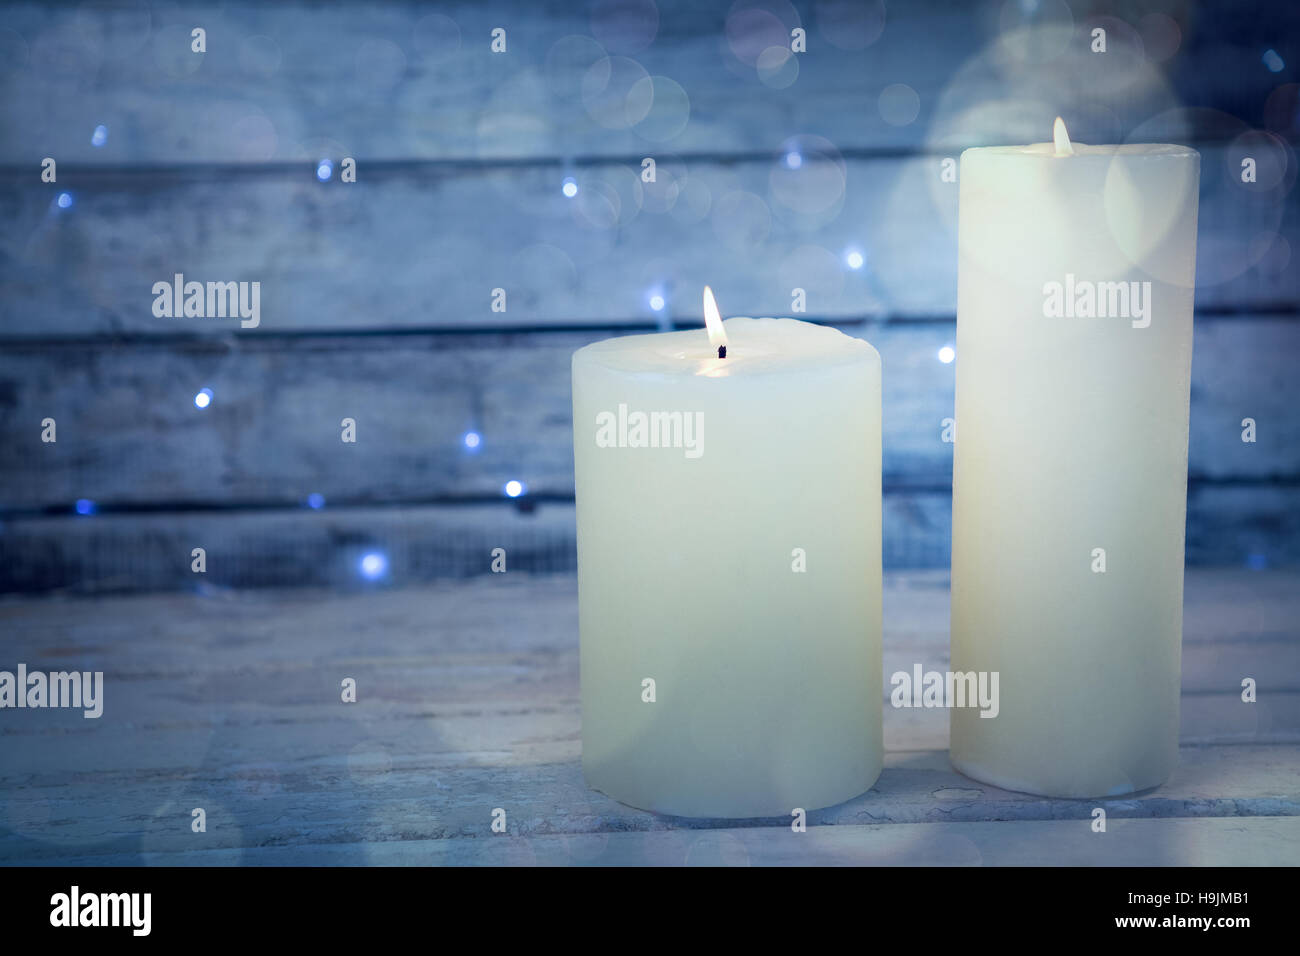 Candles burning on wooden plank Stock Photo